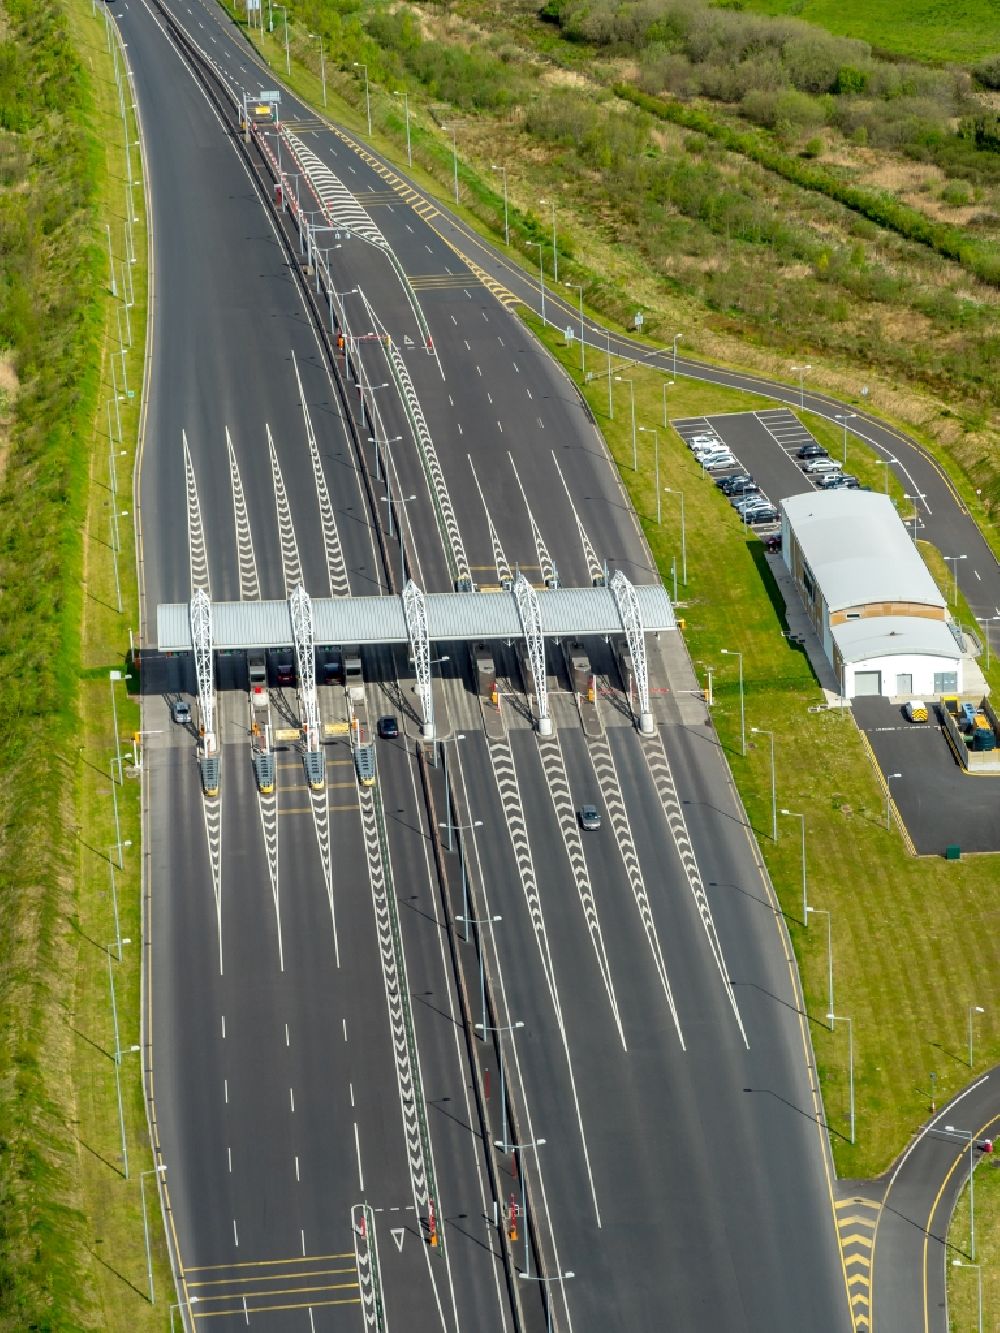 Aerial photograph Limerick - Highway toll station and paying agent of the N18 before Shannon Tunnel in Limerick, Ireland